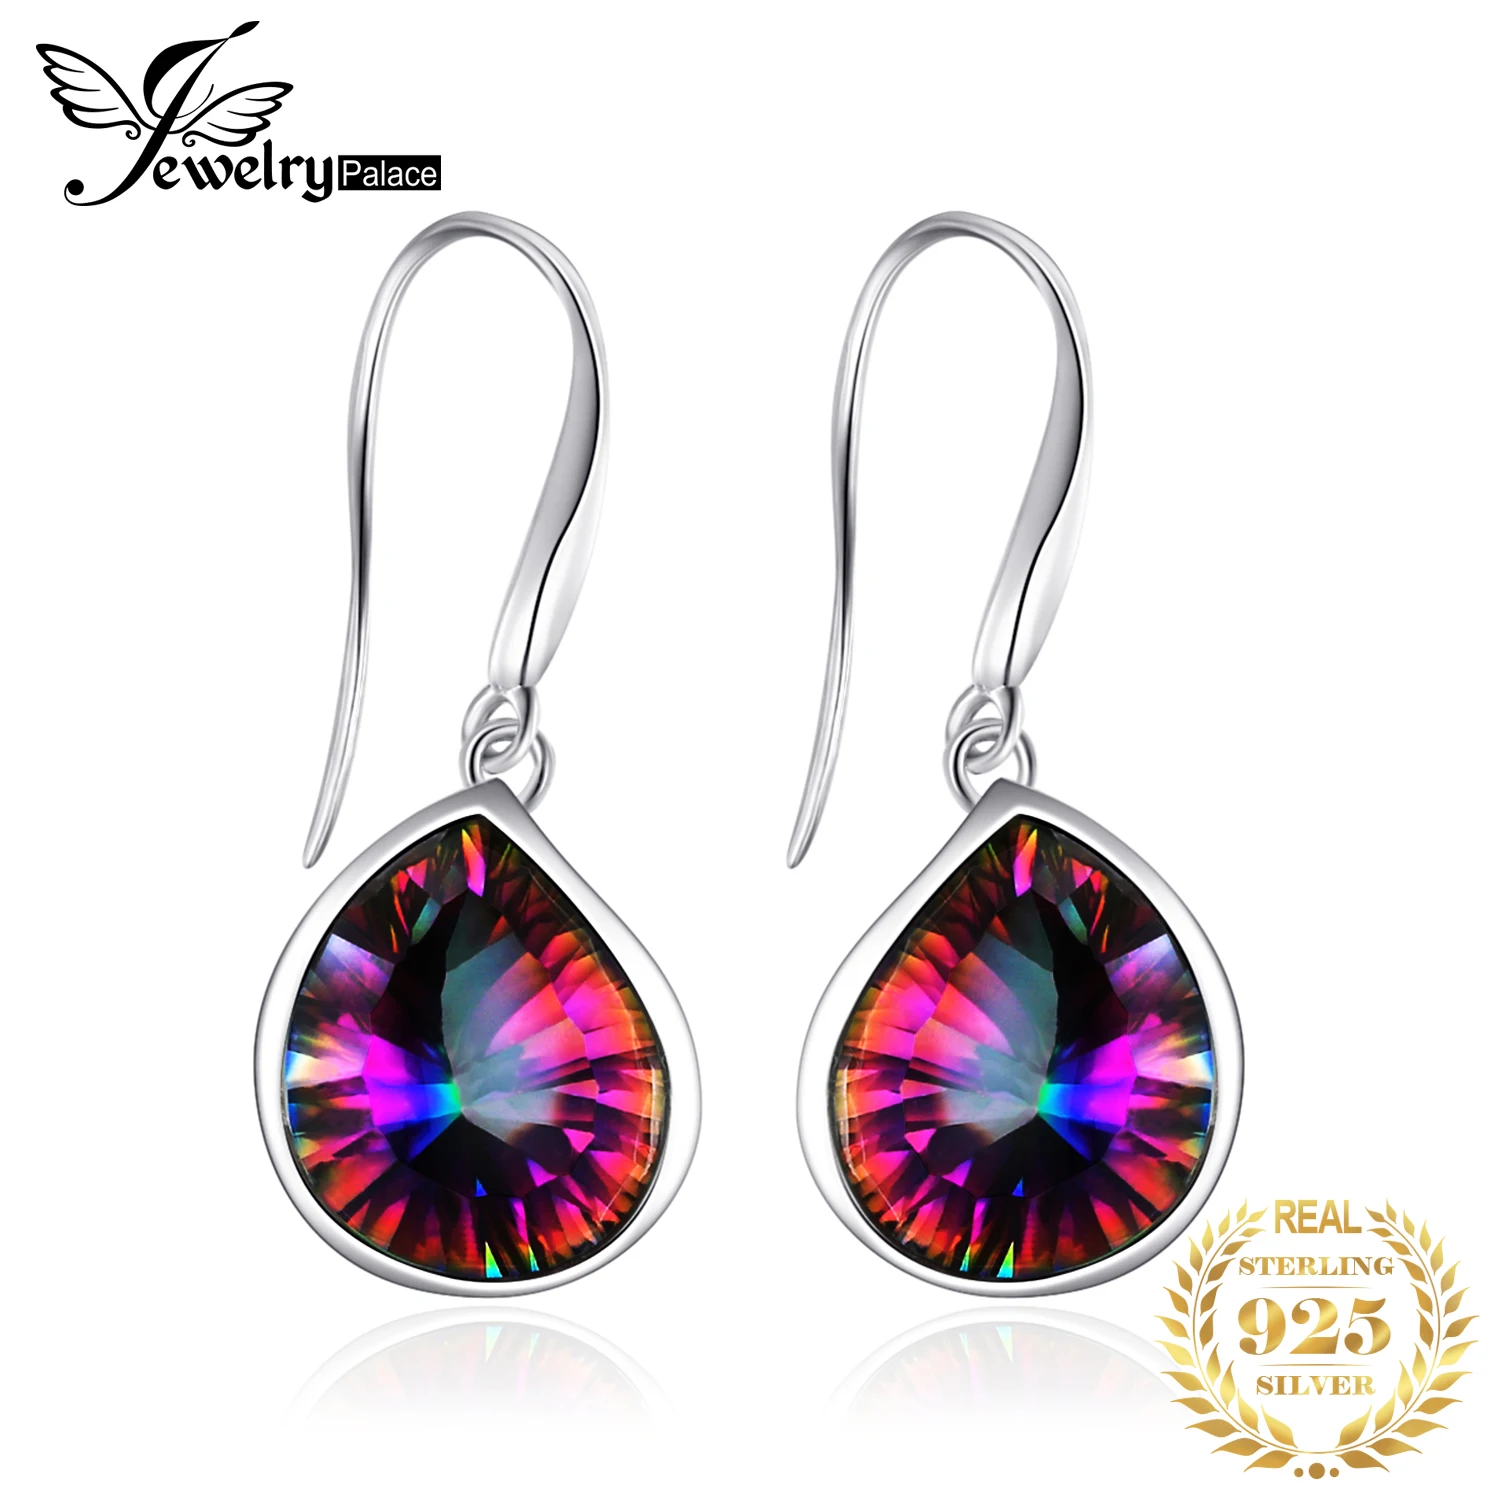 

JewelryPalace Genuine Natural Rainbow Fire Mystic Quartz 925 Solid Sterling Silver Dangle Earrings for Women Gemstone Jewelry